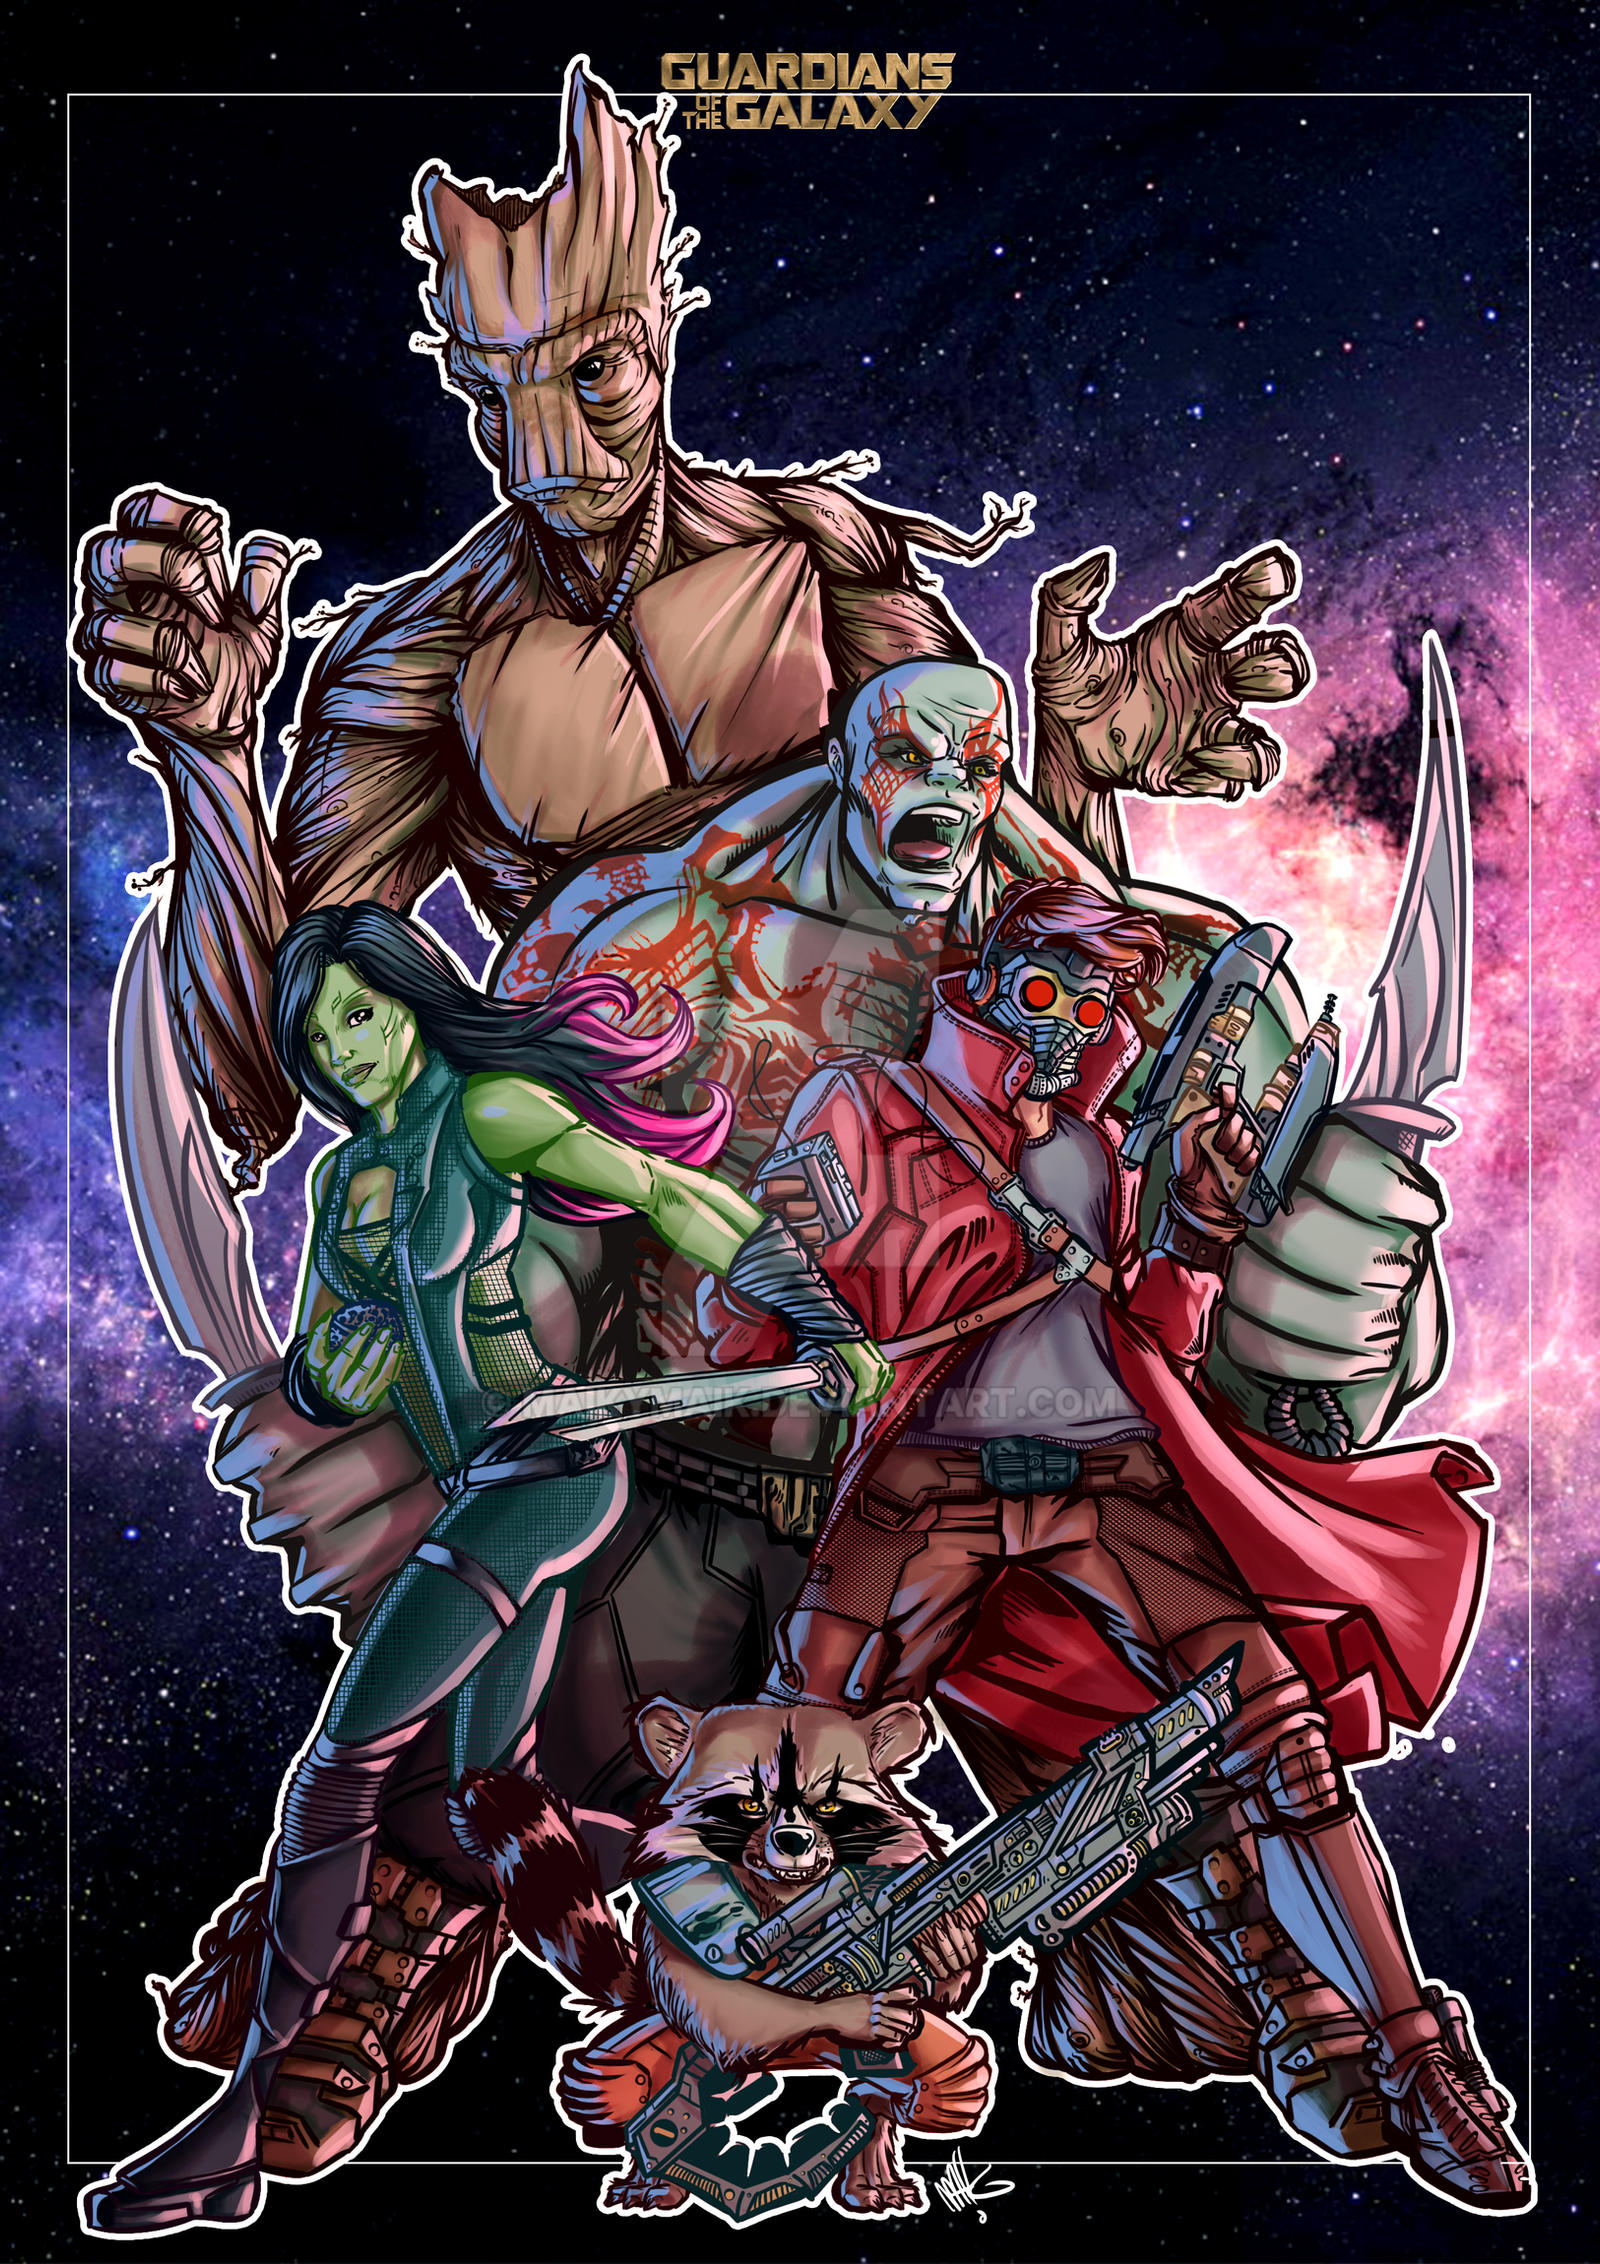 GUARDIANS OF THE GALAXY tribute